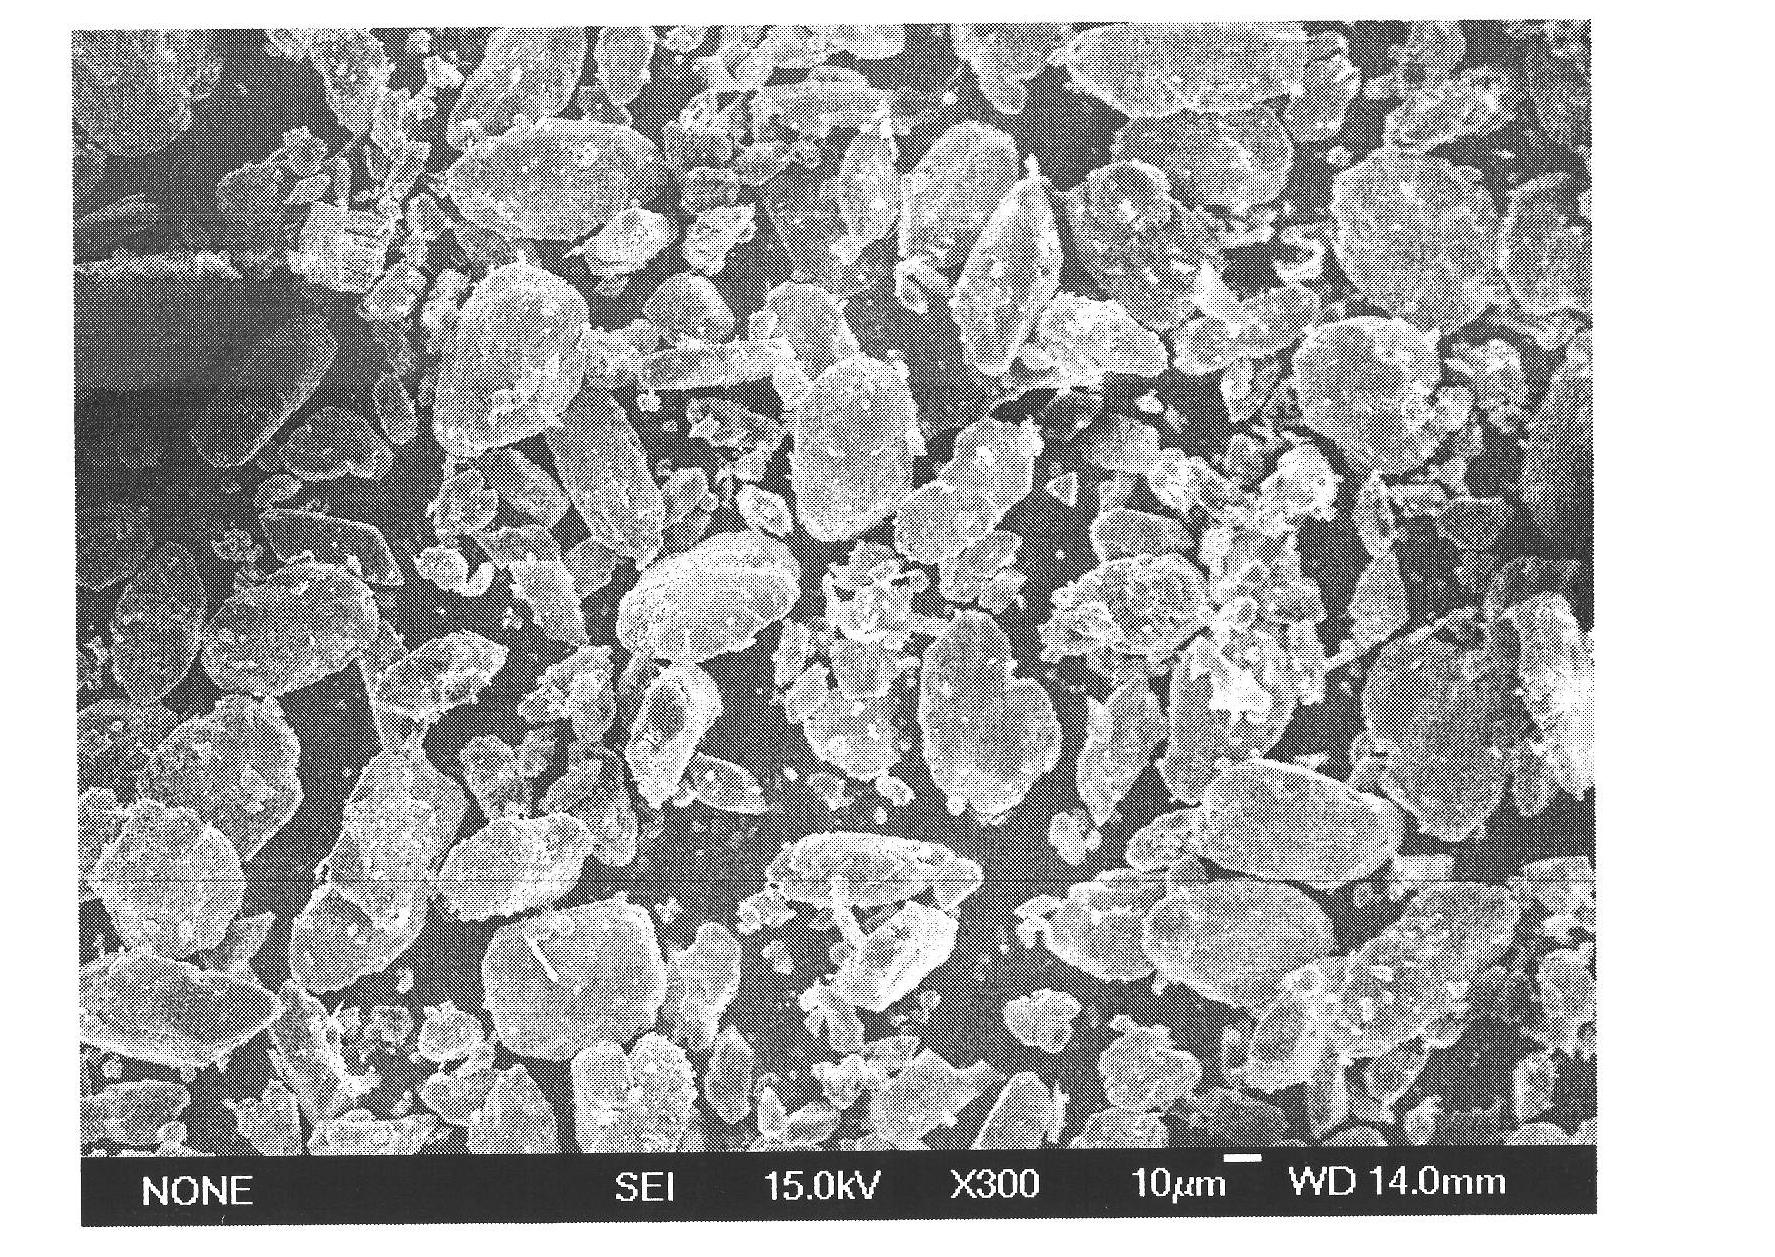 Method for preparing calcium sulfate crystal whiskers from desulfurized gypsum under normal pressure